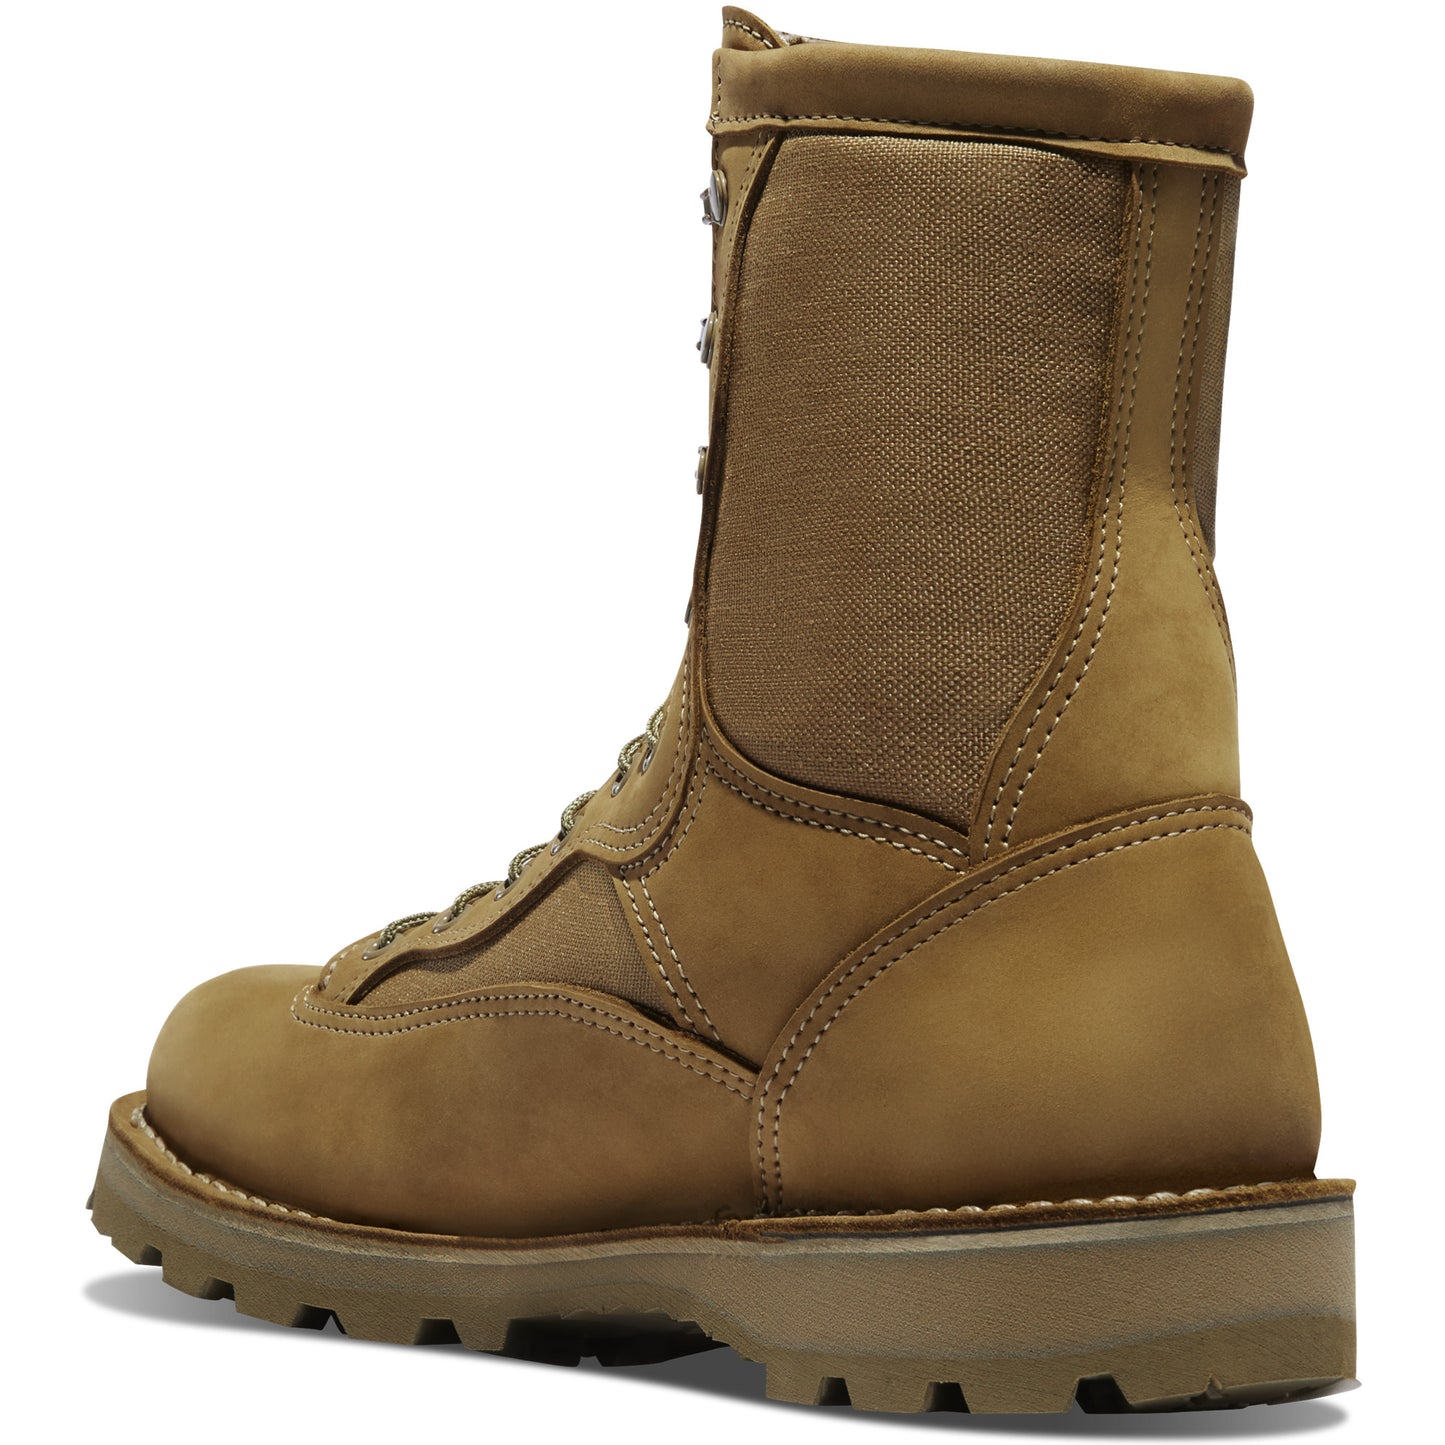 Danner Marine Expeditionary Boot 8"